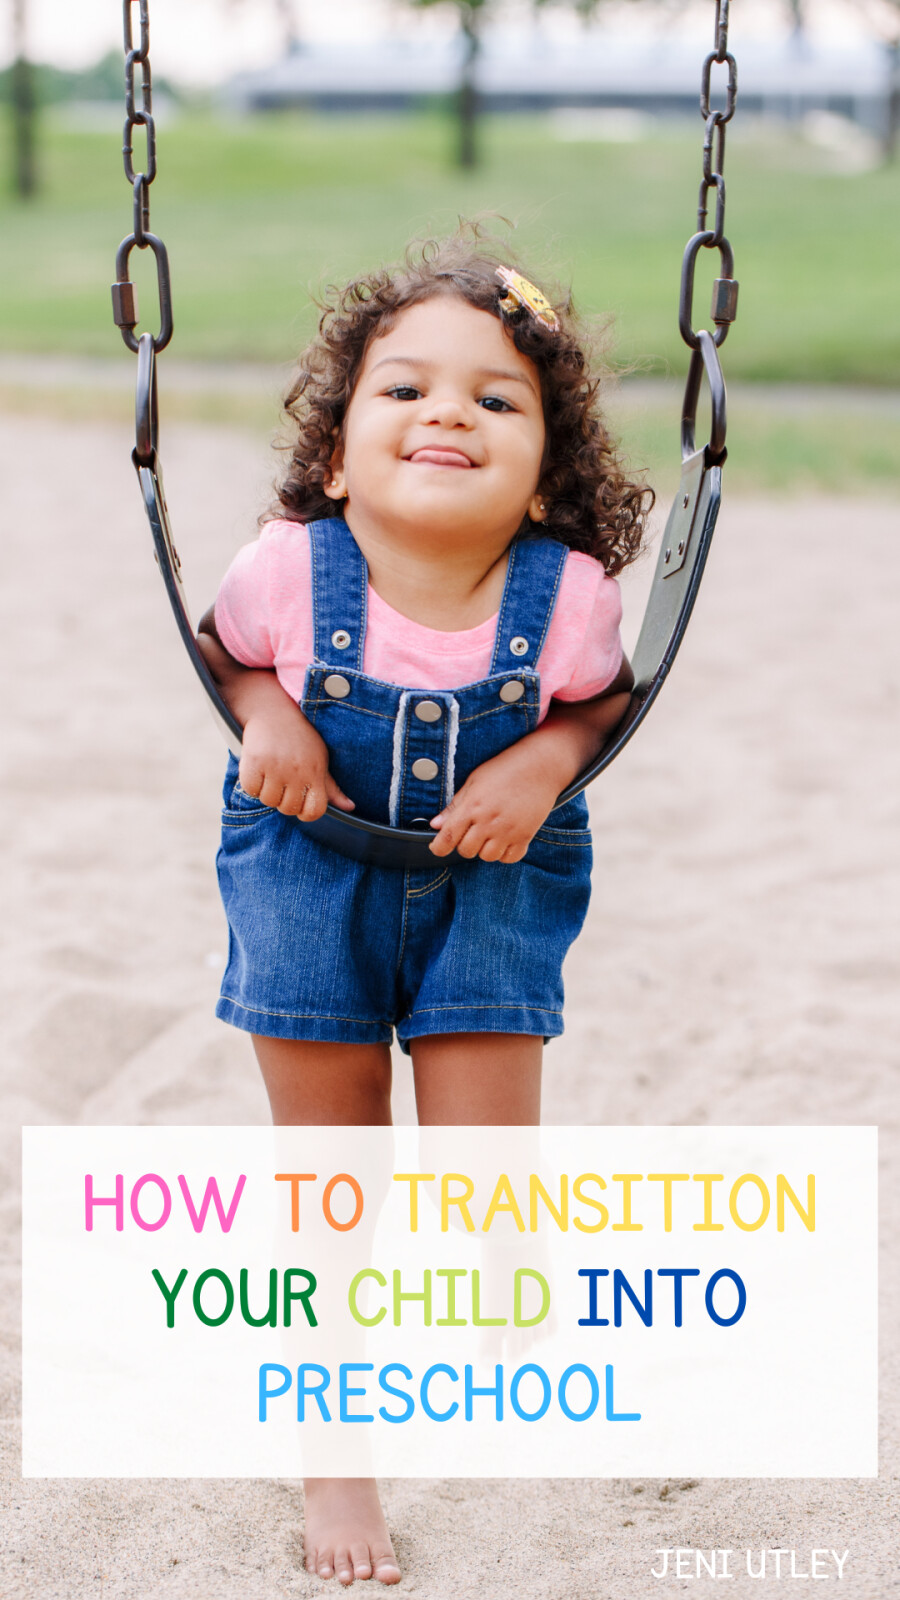 HOW TO TRANSITION YOUR CHILD INTO PRESCHOOL